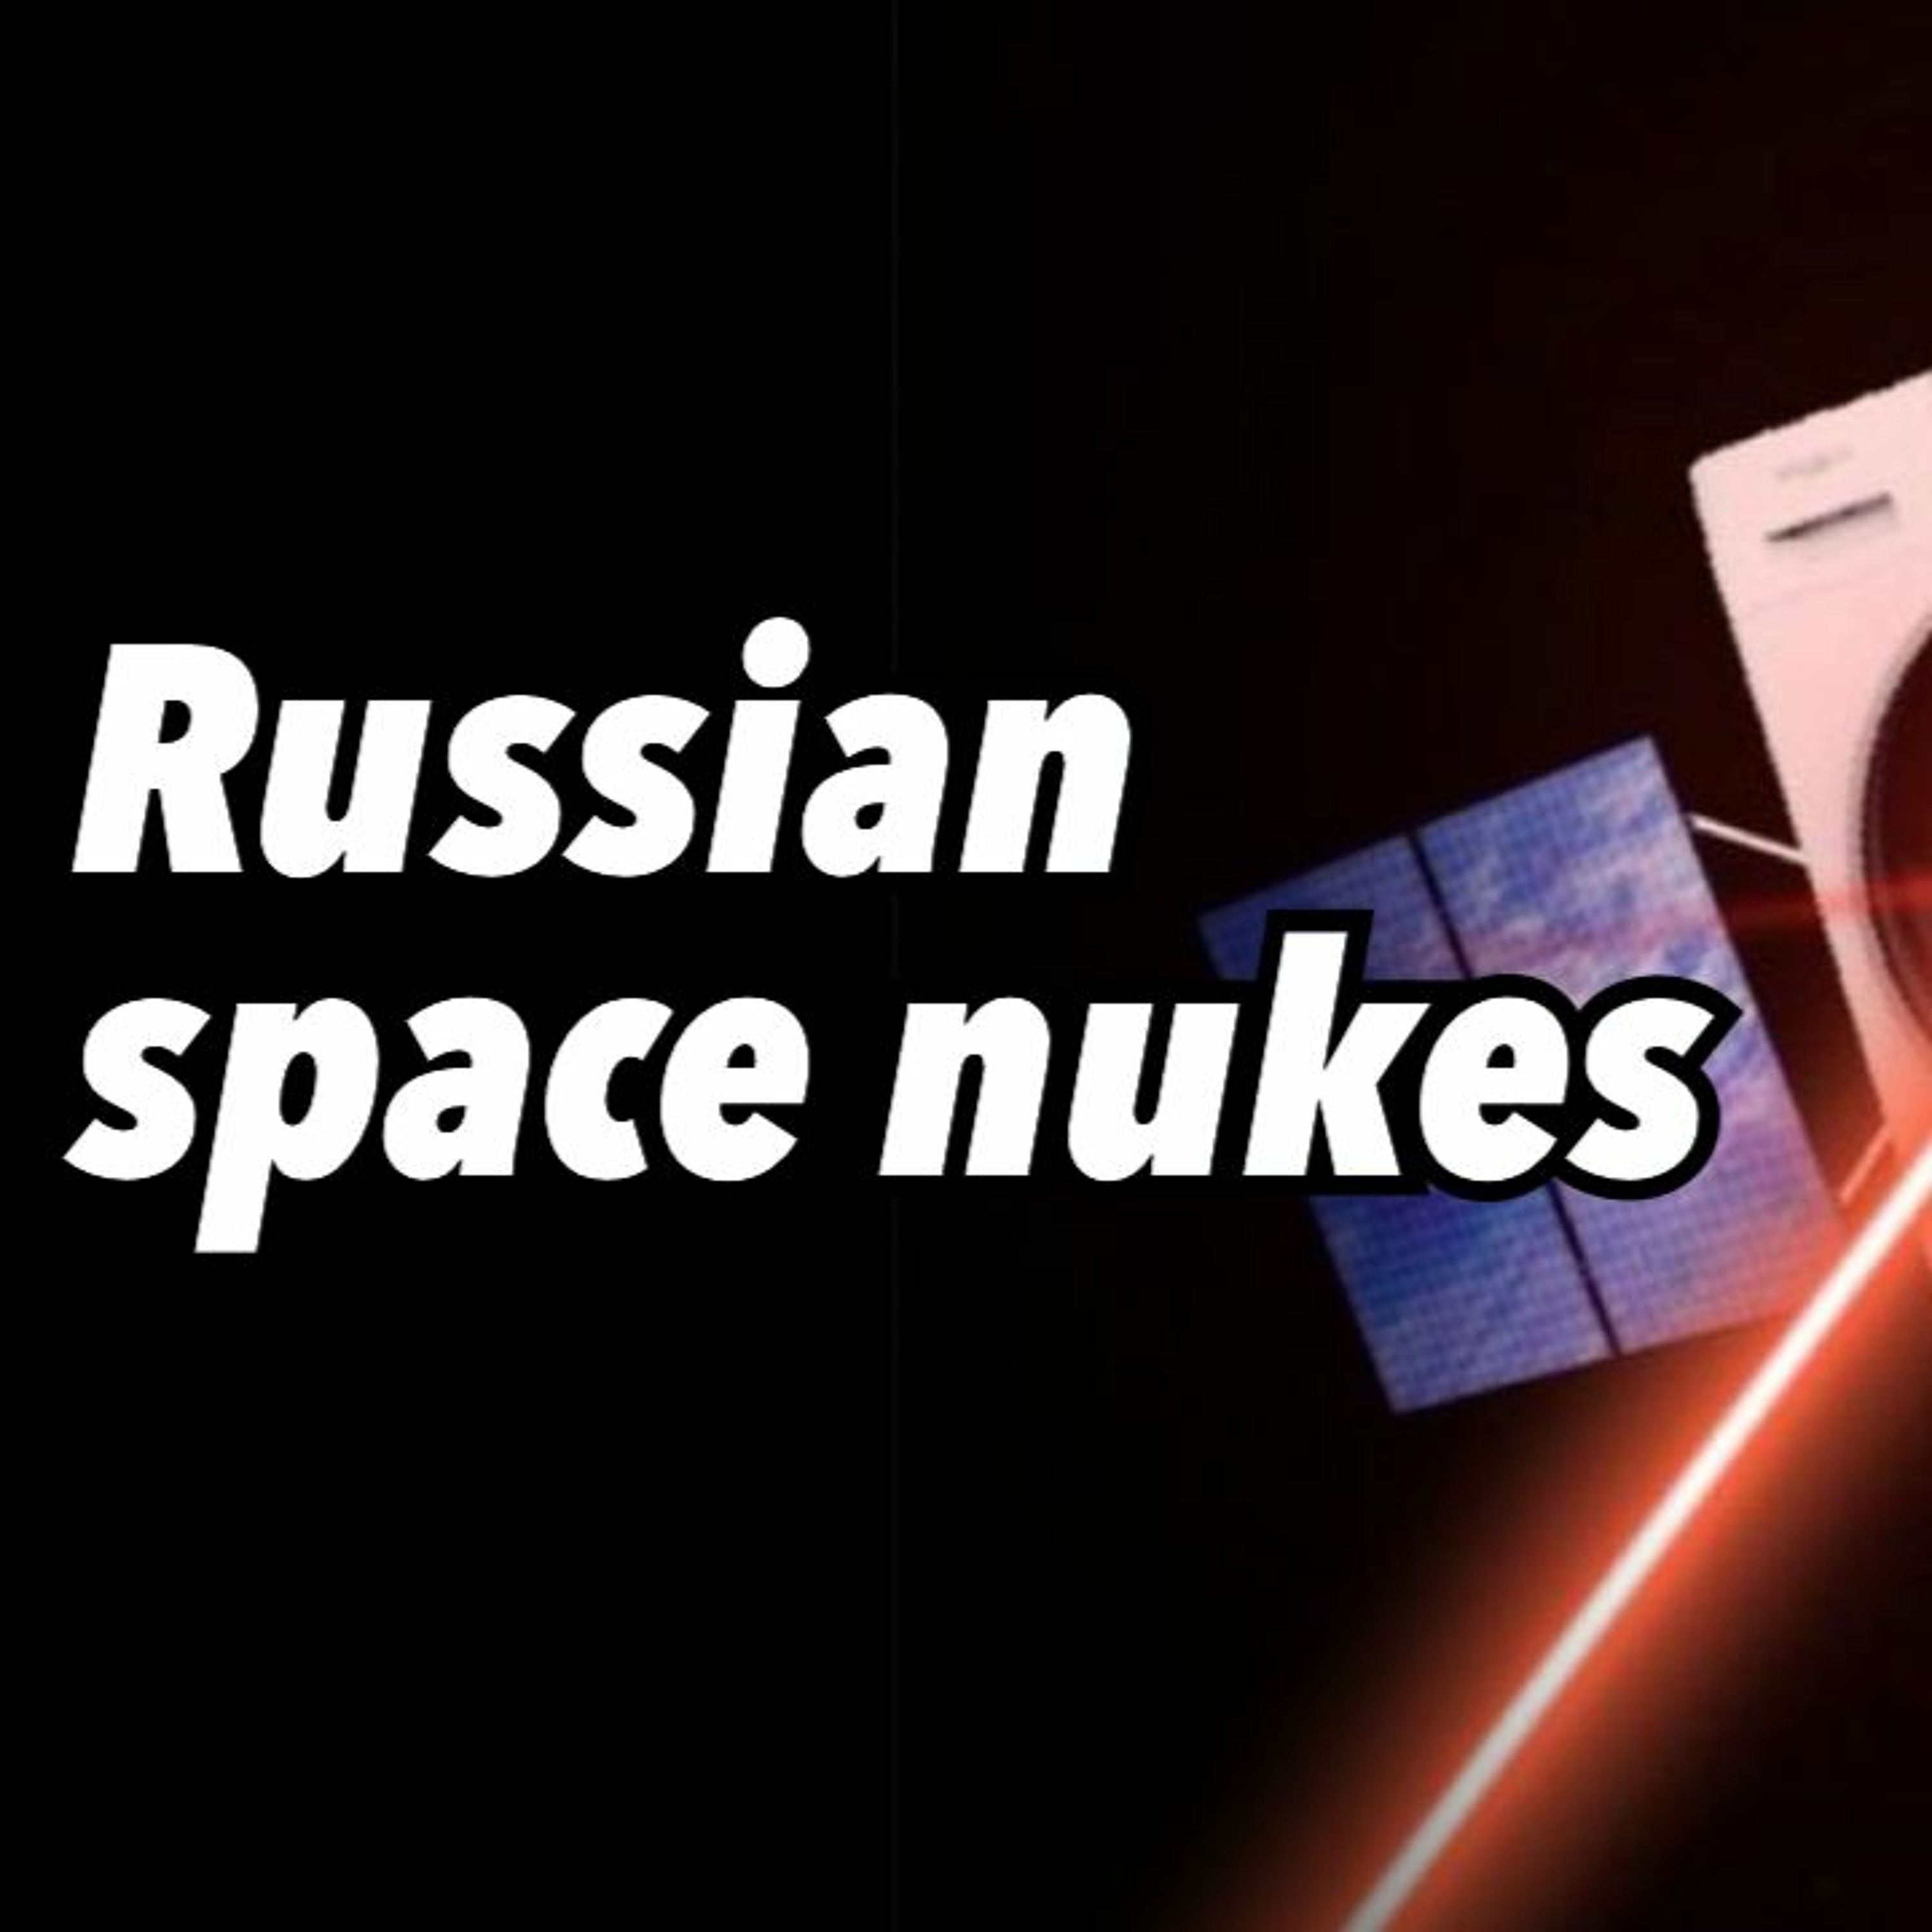 Russian space nukes